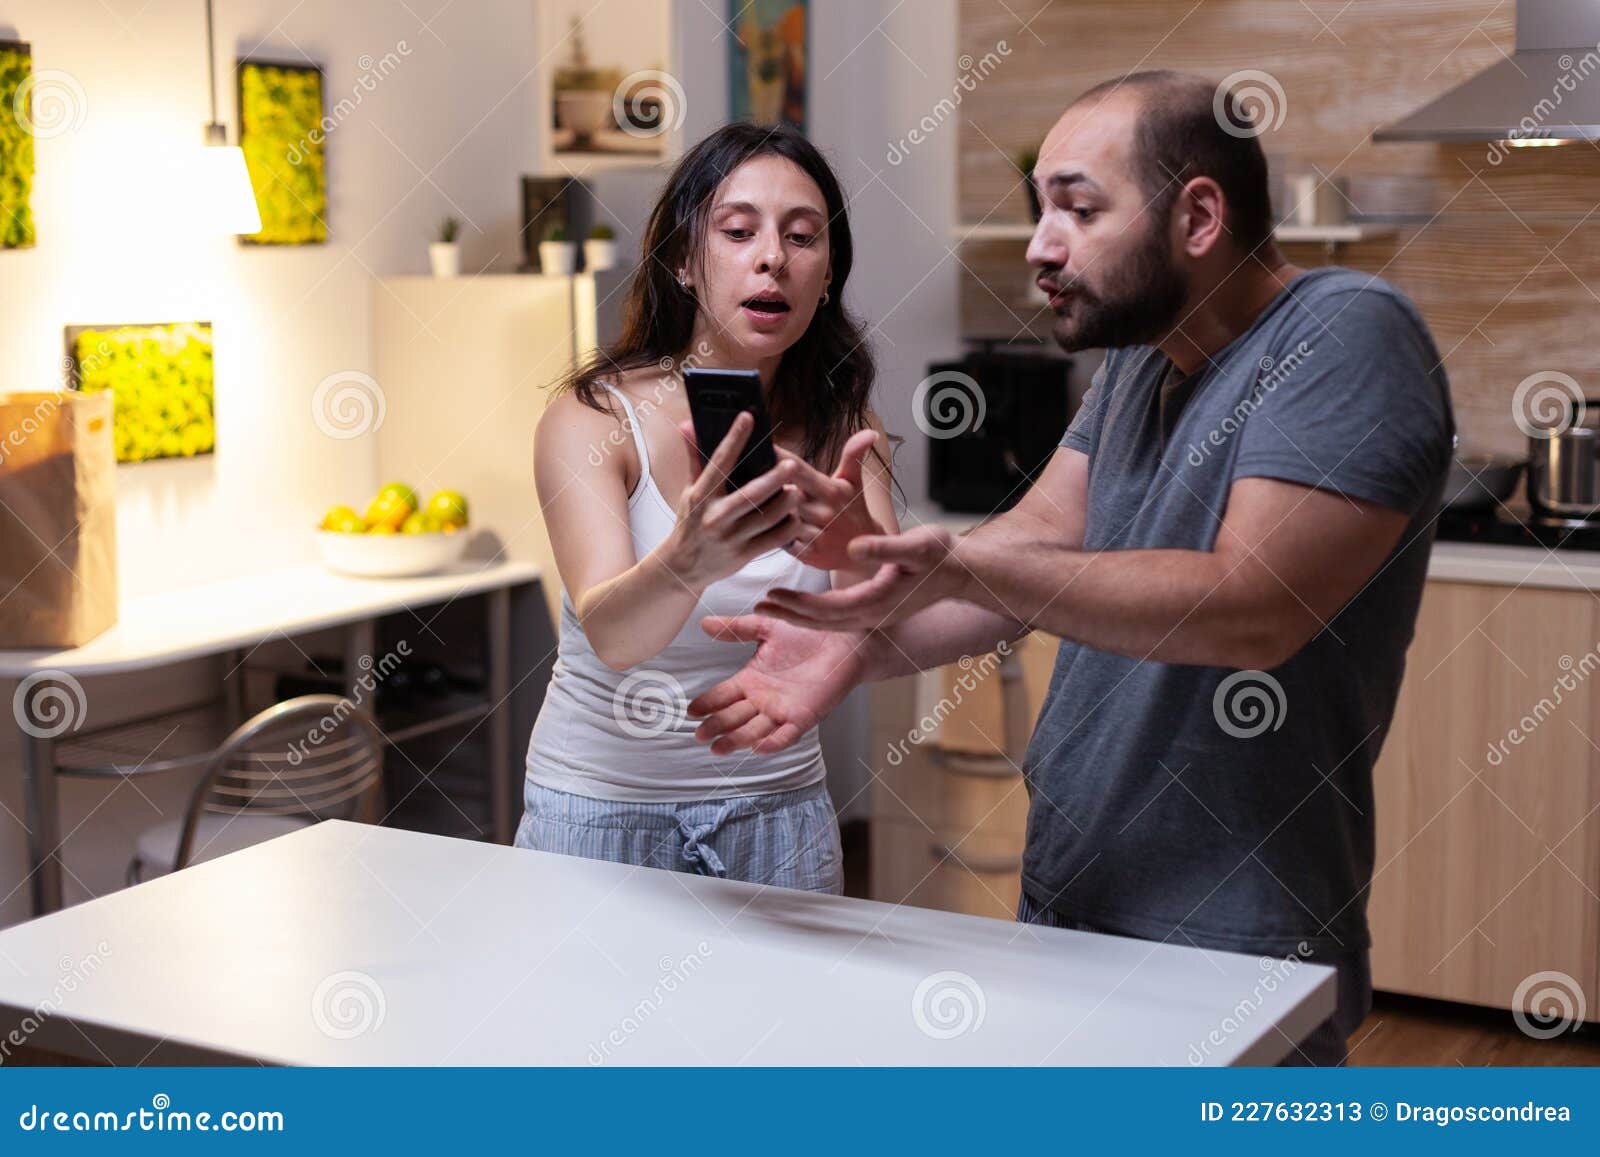 connie read add caught cheating in the kitchen photo